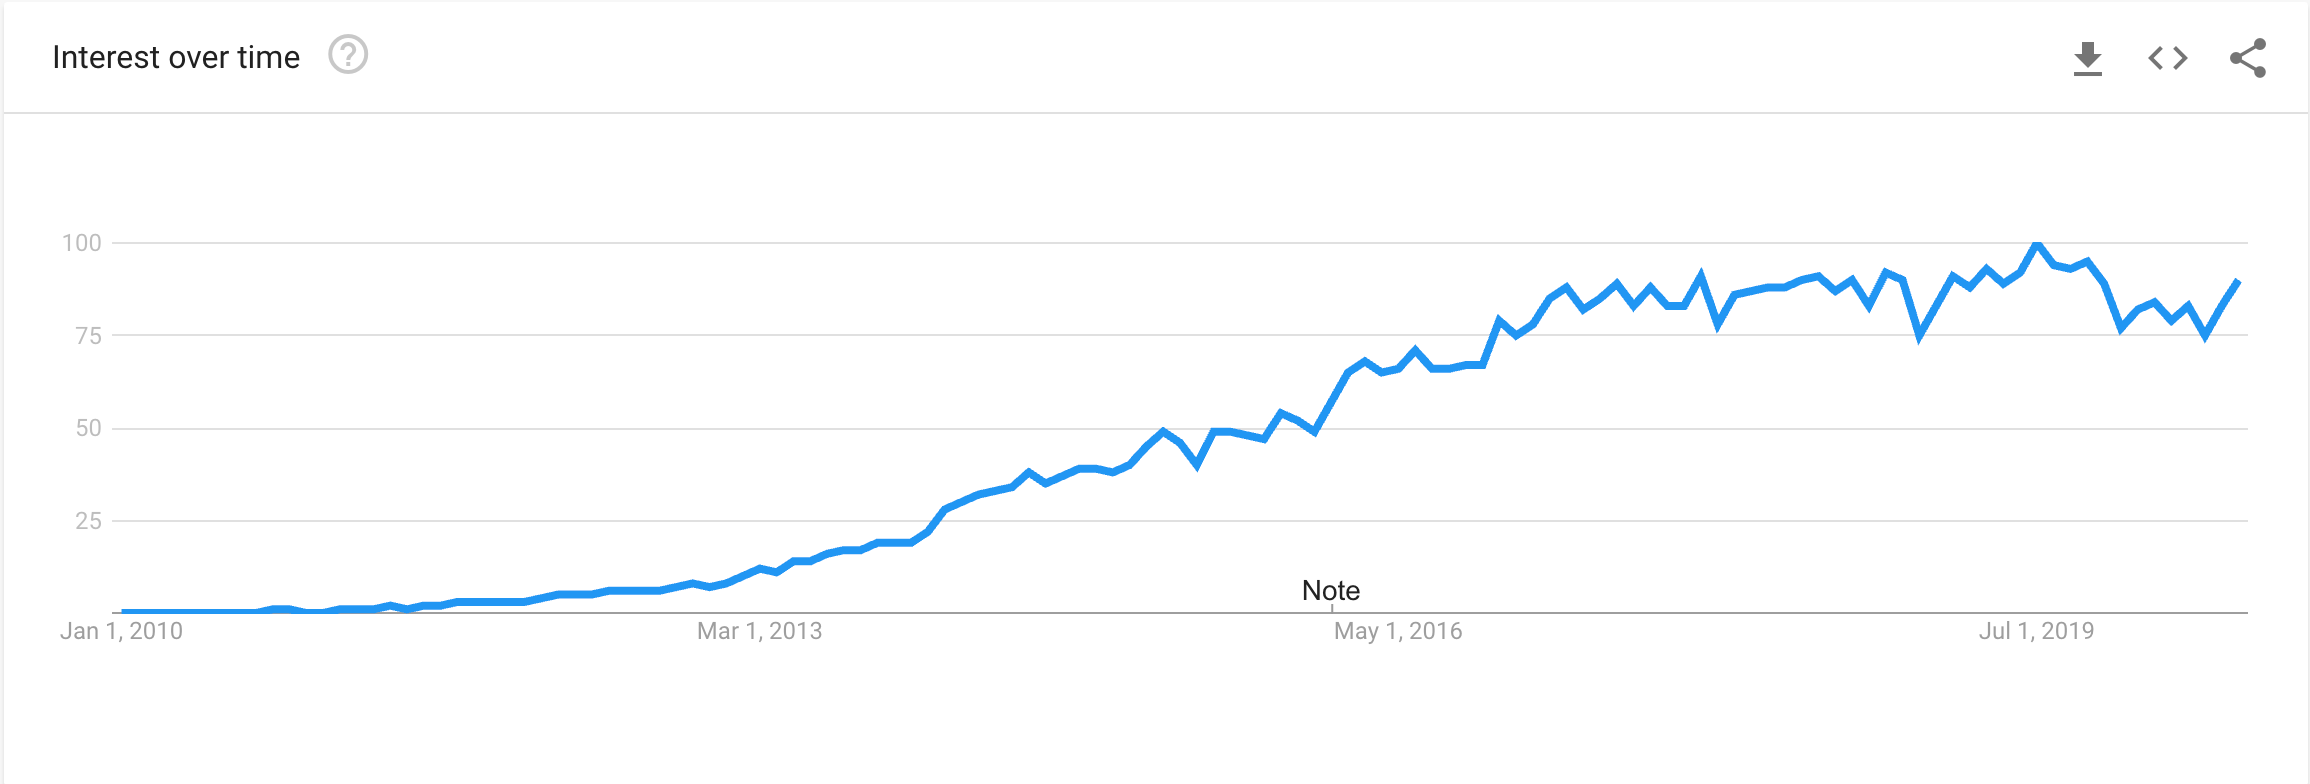 Google Trends interest for Elasticsearch since its release in 2010 (Worldwide)